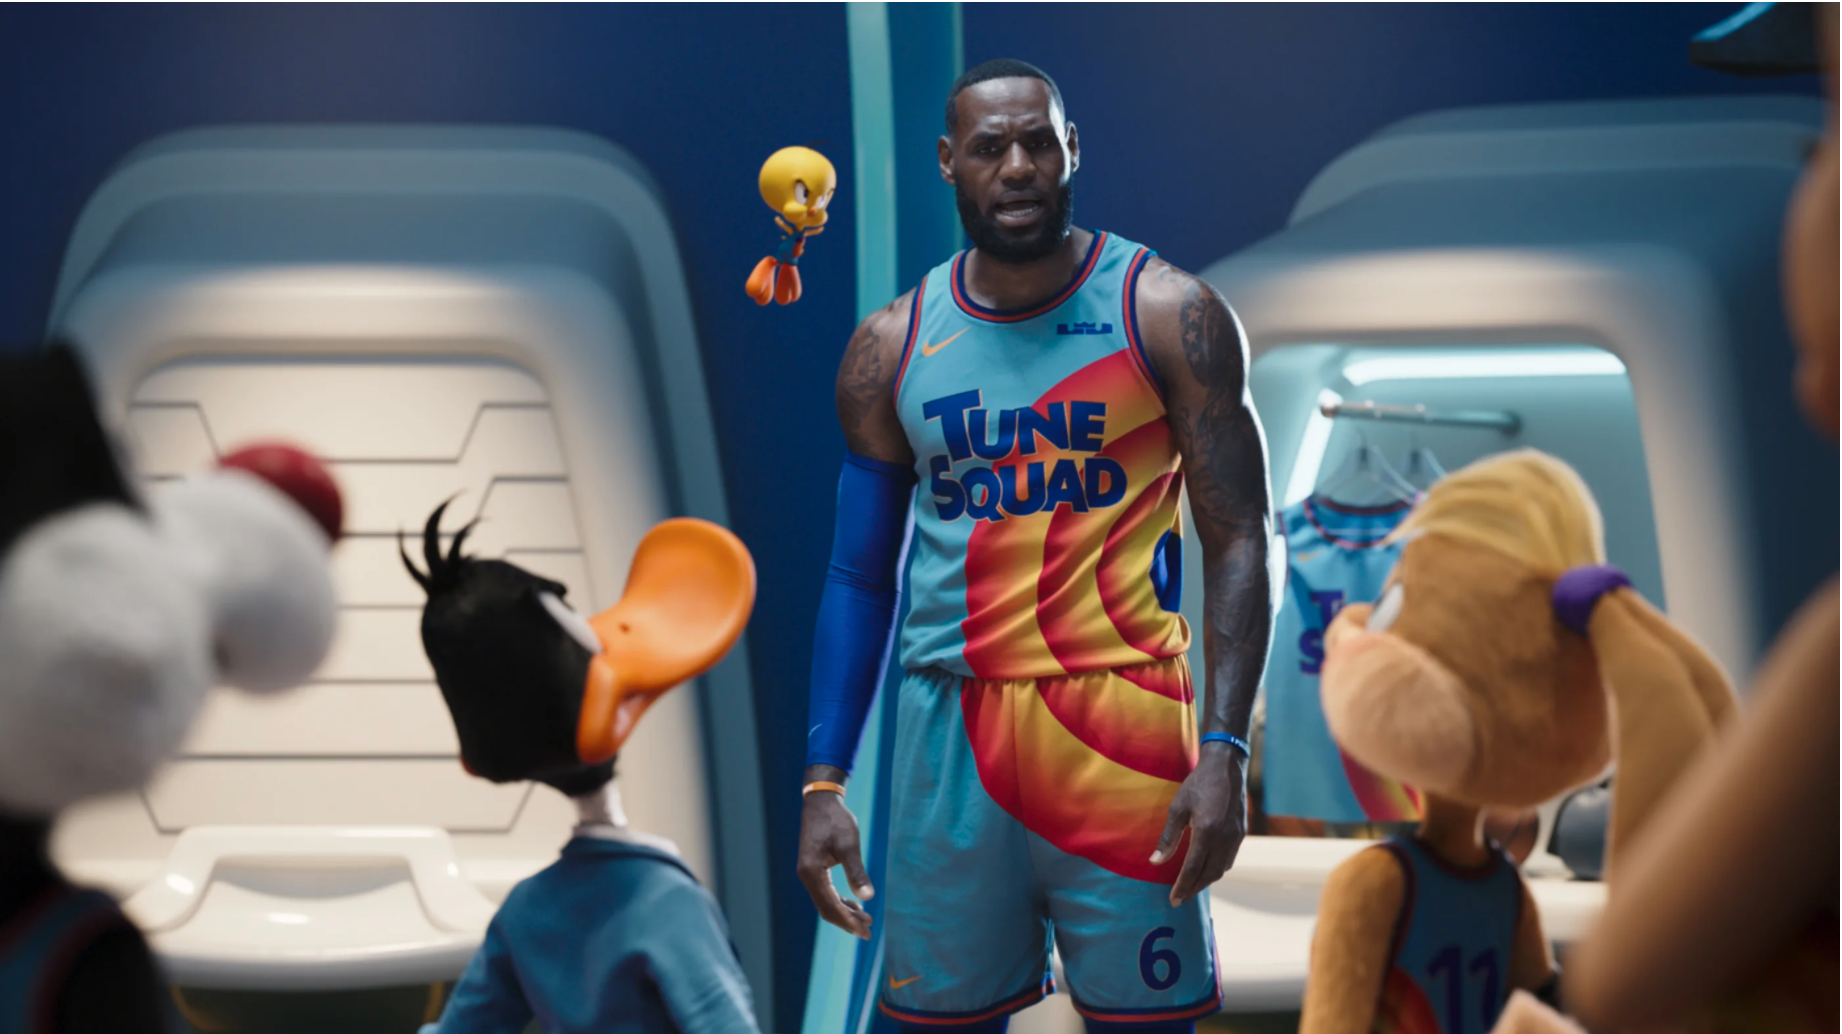 "Space Jam: A New Legacy", photo courtesy of Warner Bros.